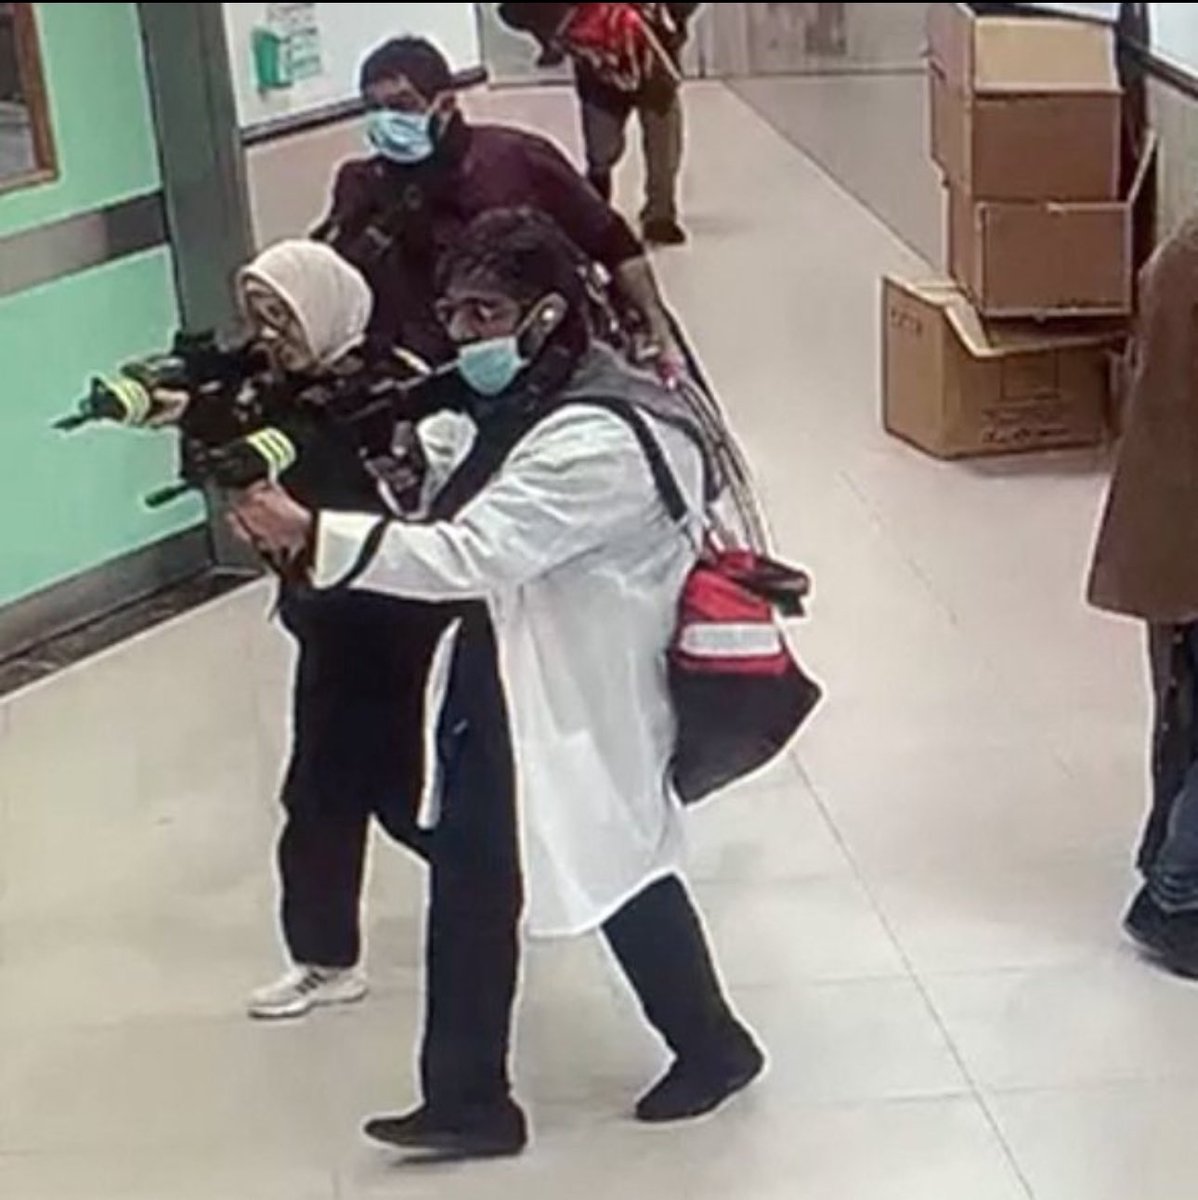 Remember when Isis did this in a hospital. It was actually Israelis shooting up patients in a Palestinian hospital.